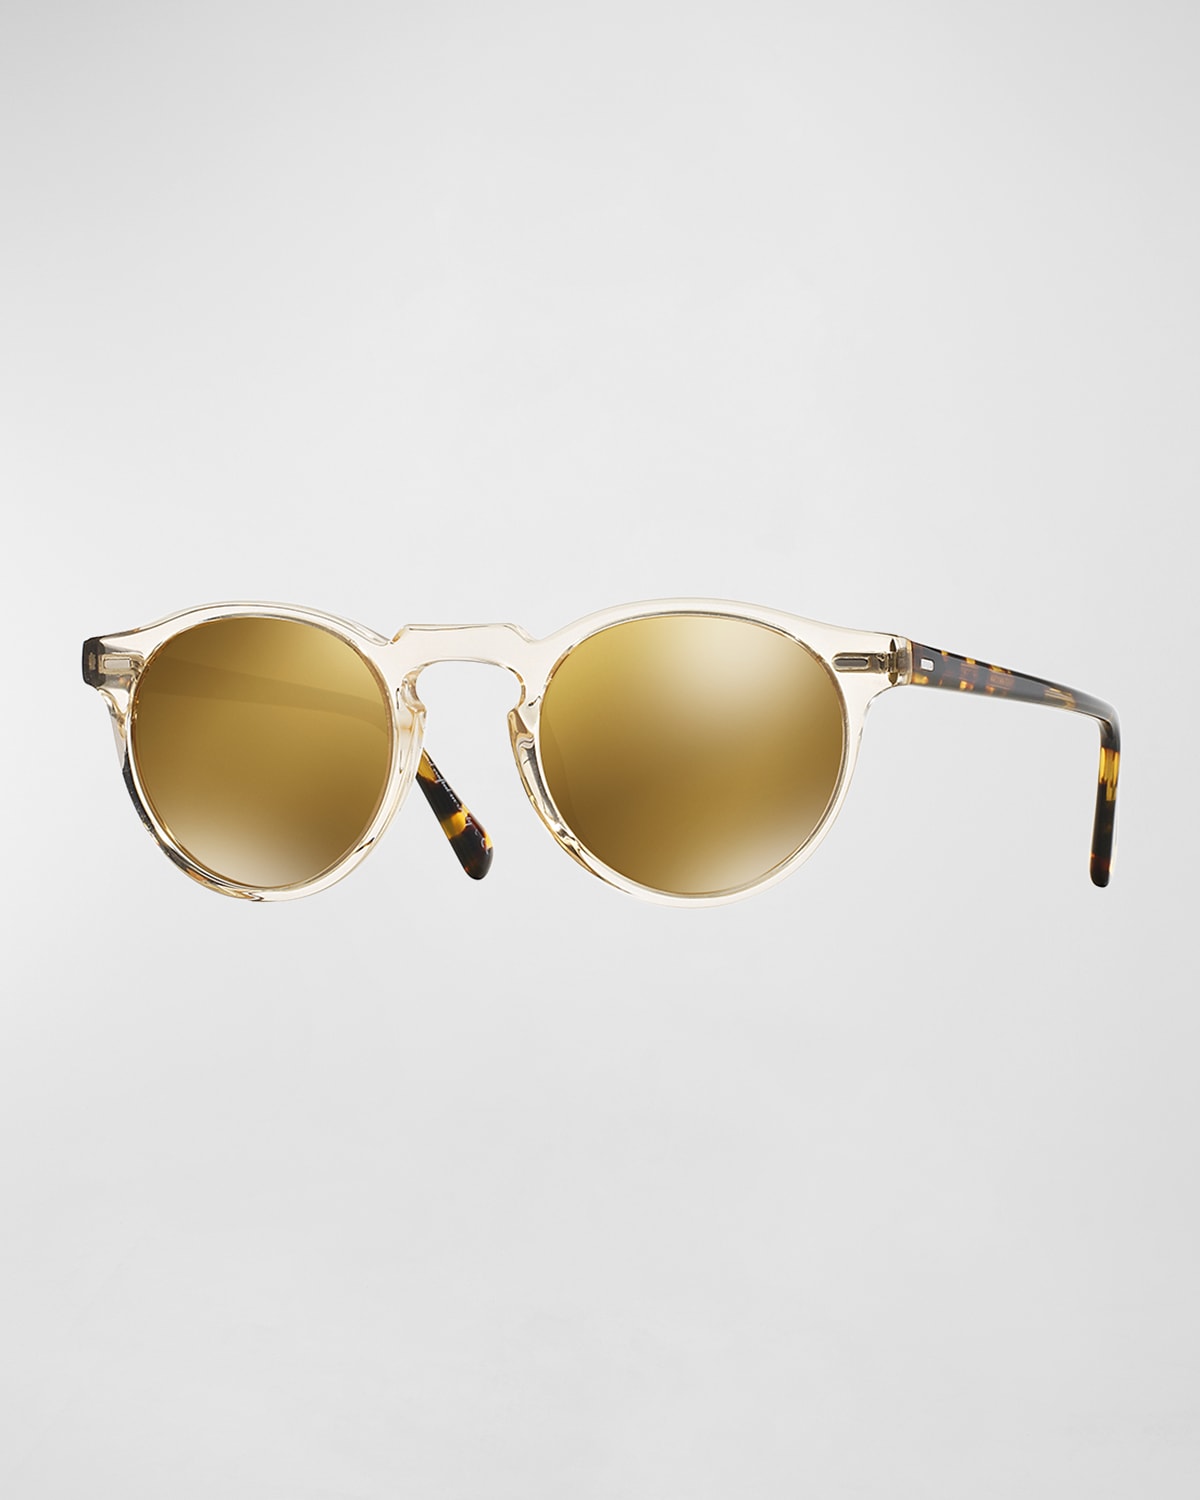 OLIVER PEOPLES GREGORY PECK 47 ROUND SUNGLASSES, YELLOW